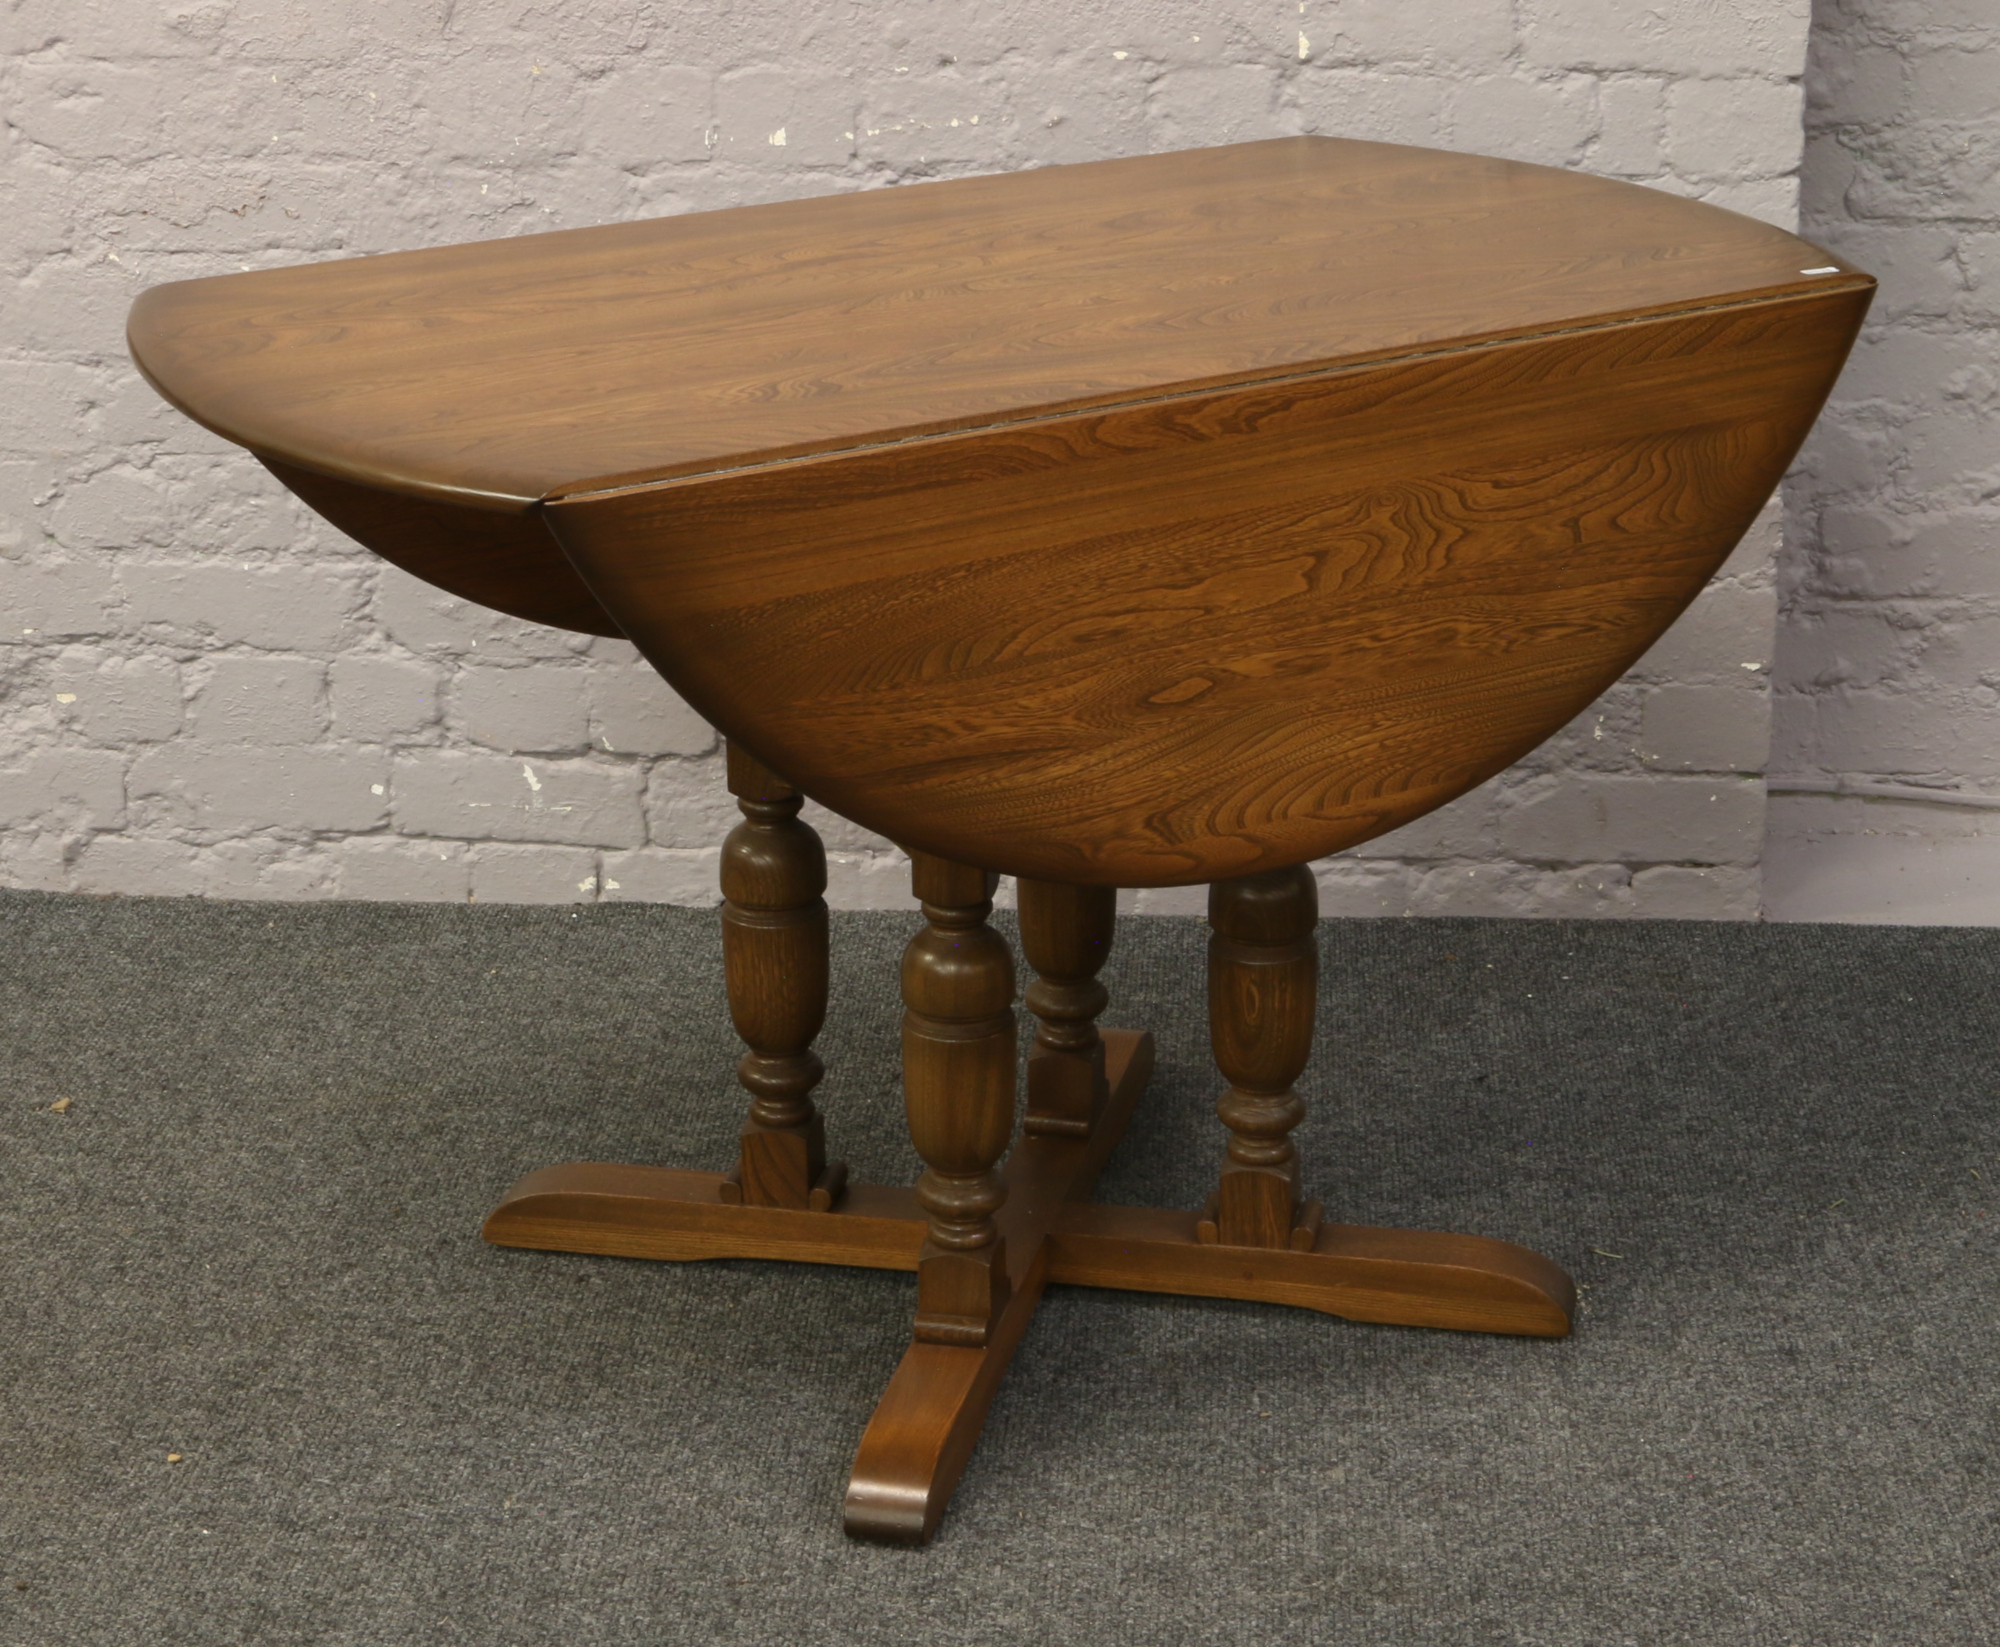 An Ercol Golden Dawn oval drop leaf dining table.